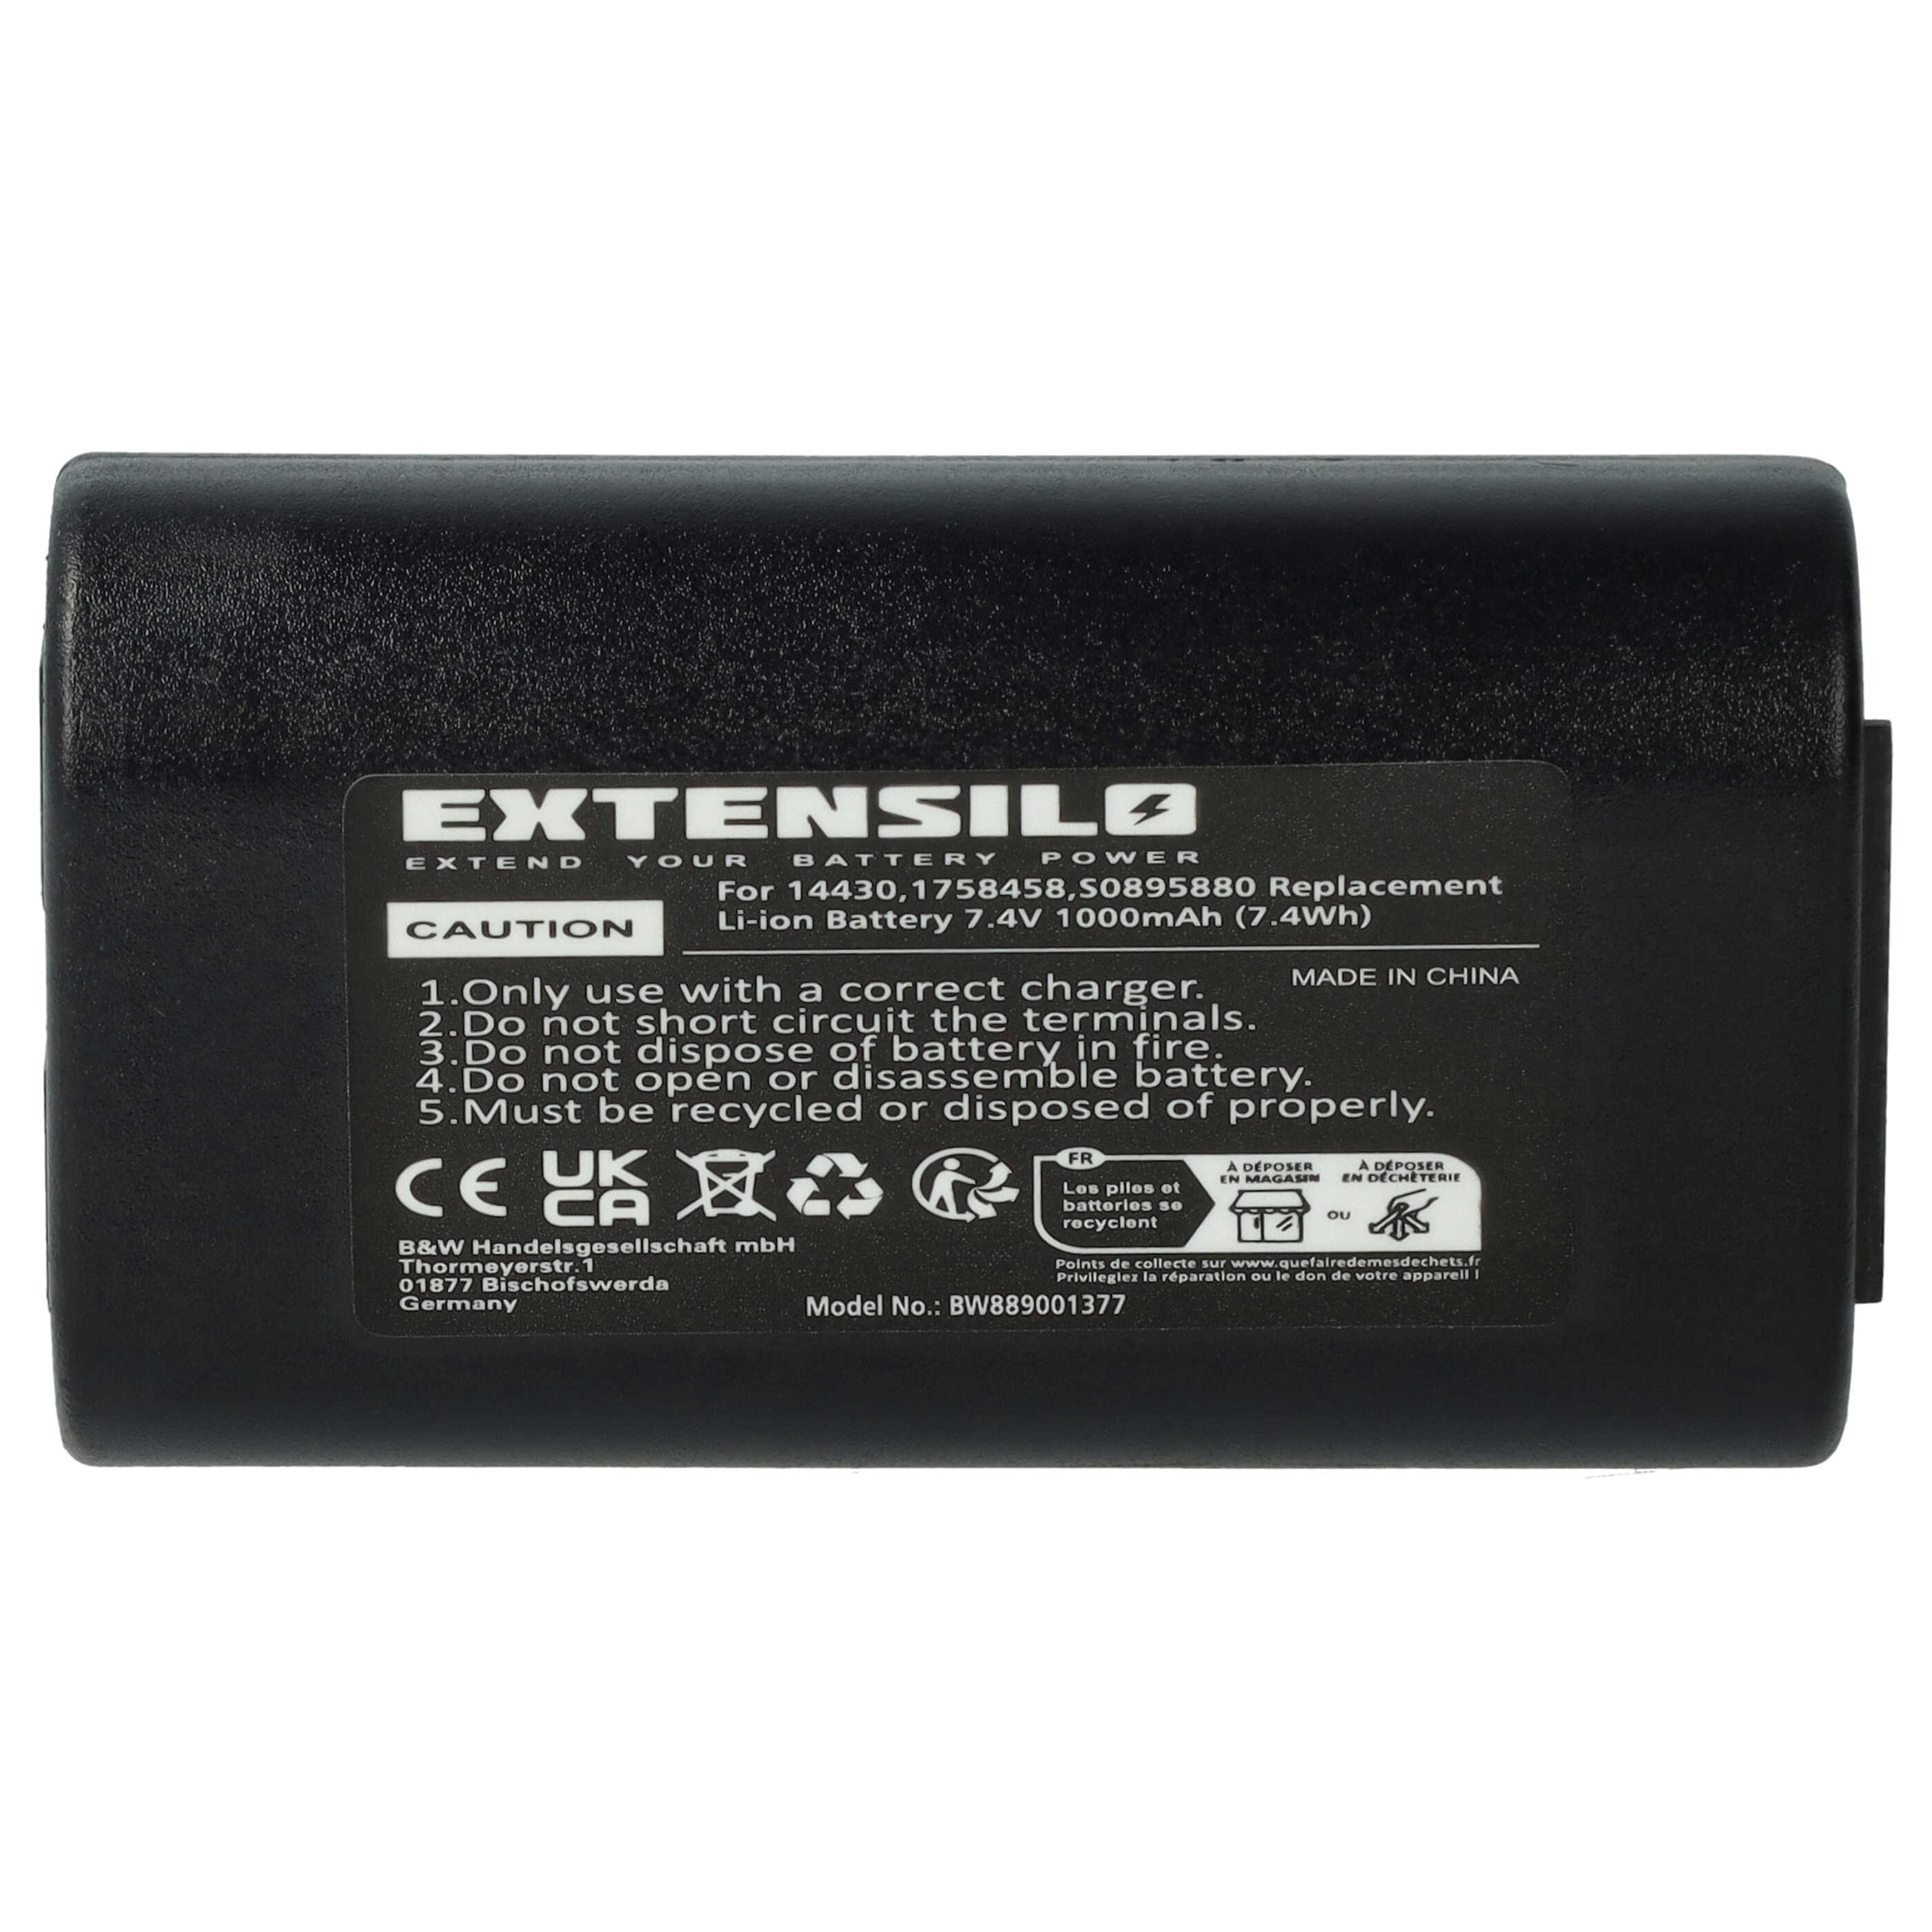 Printer Battery Replacement for 3M W003688, S0895880 - 1000mAh 7.4V Li-Ion